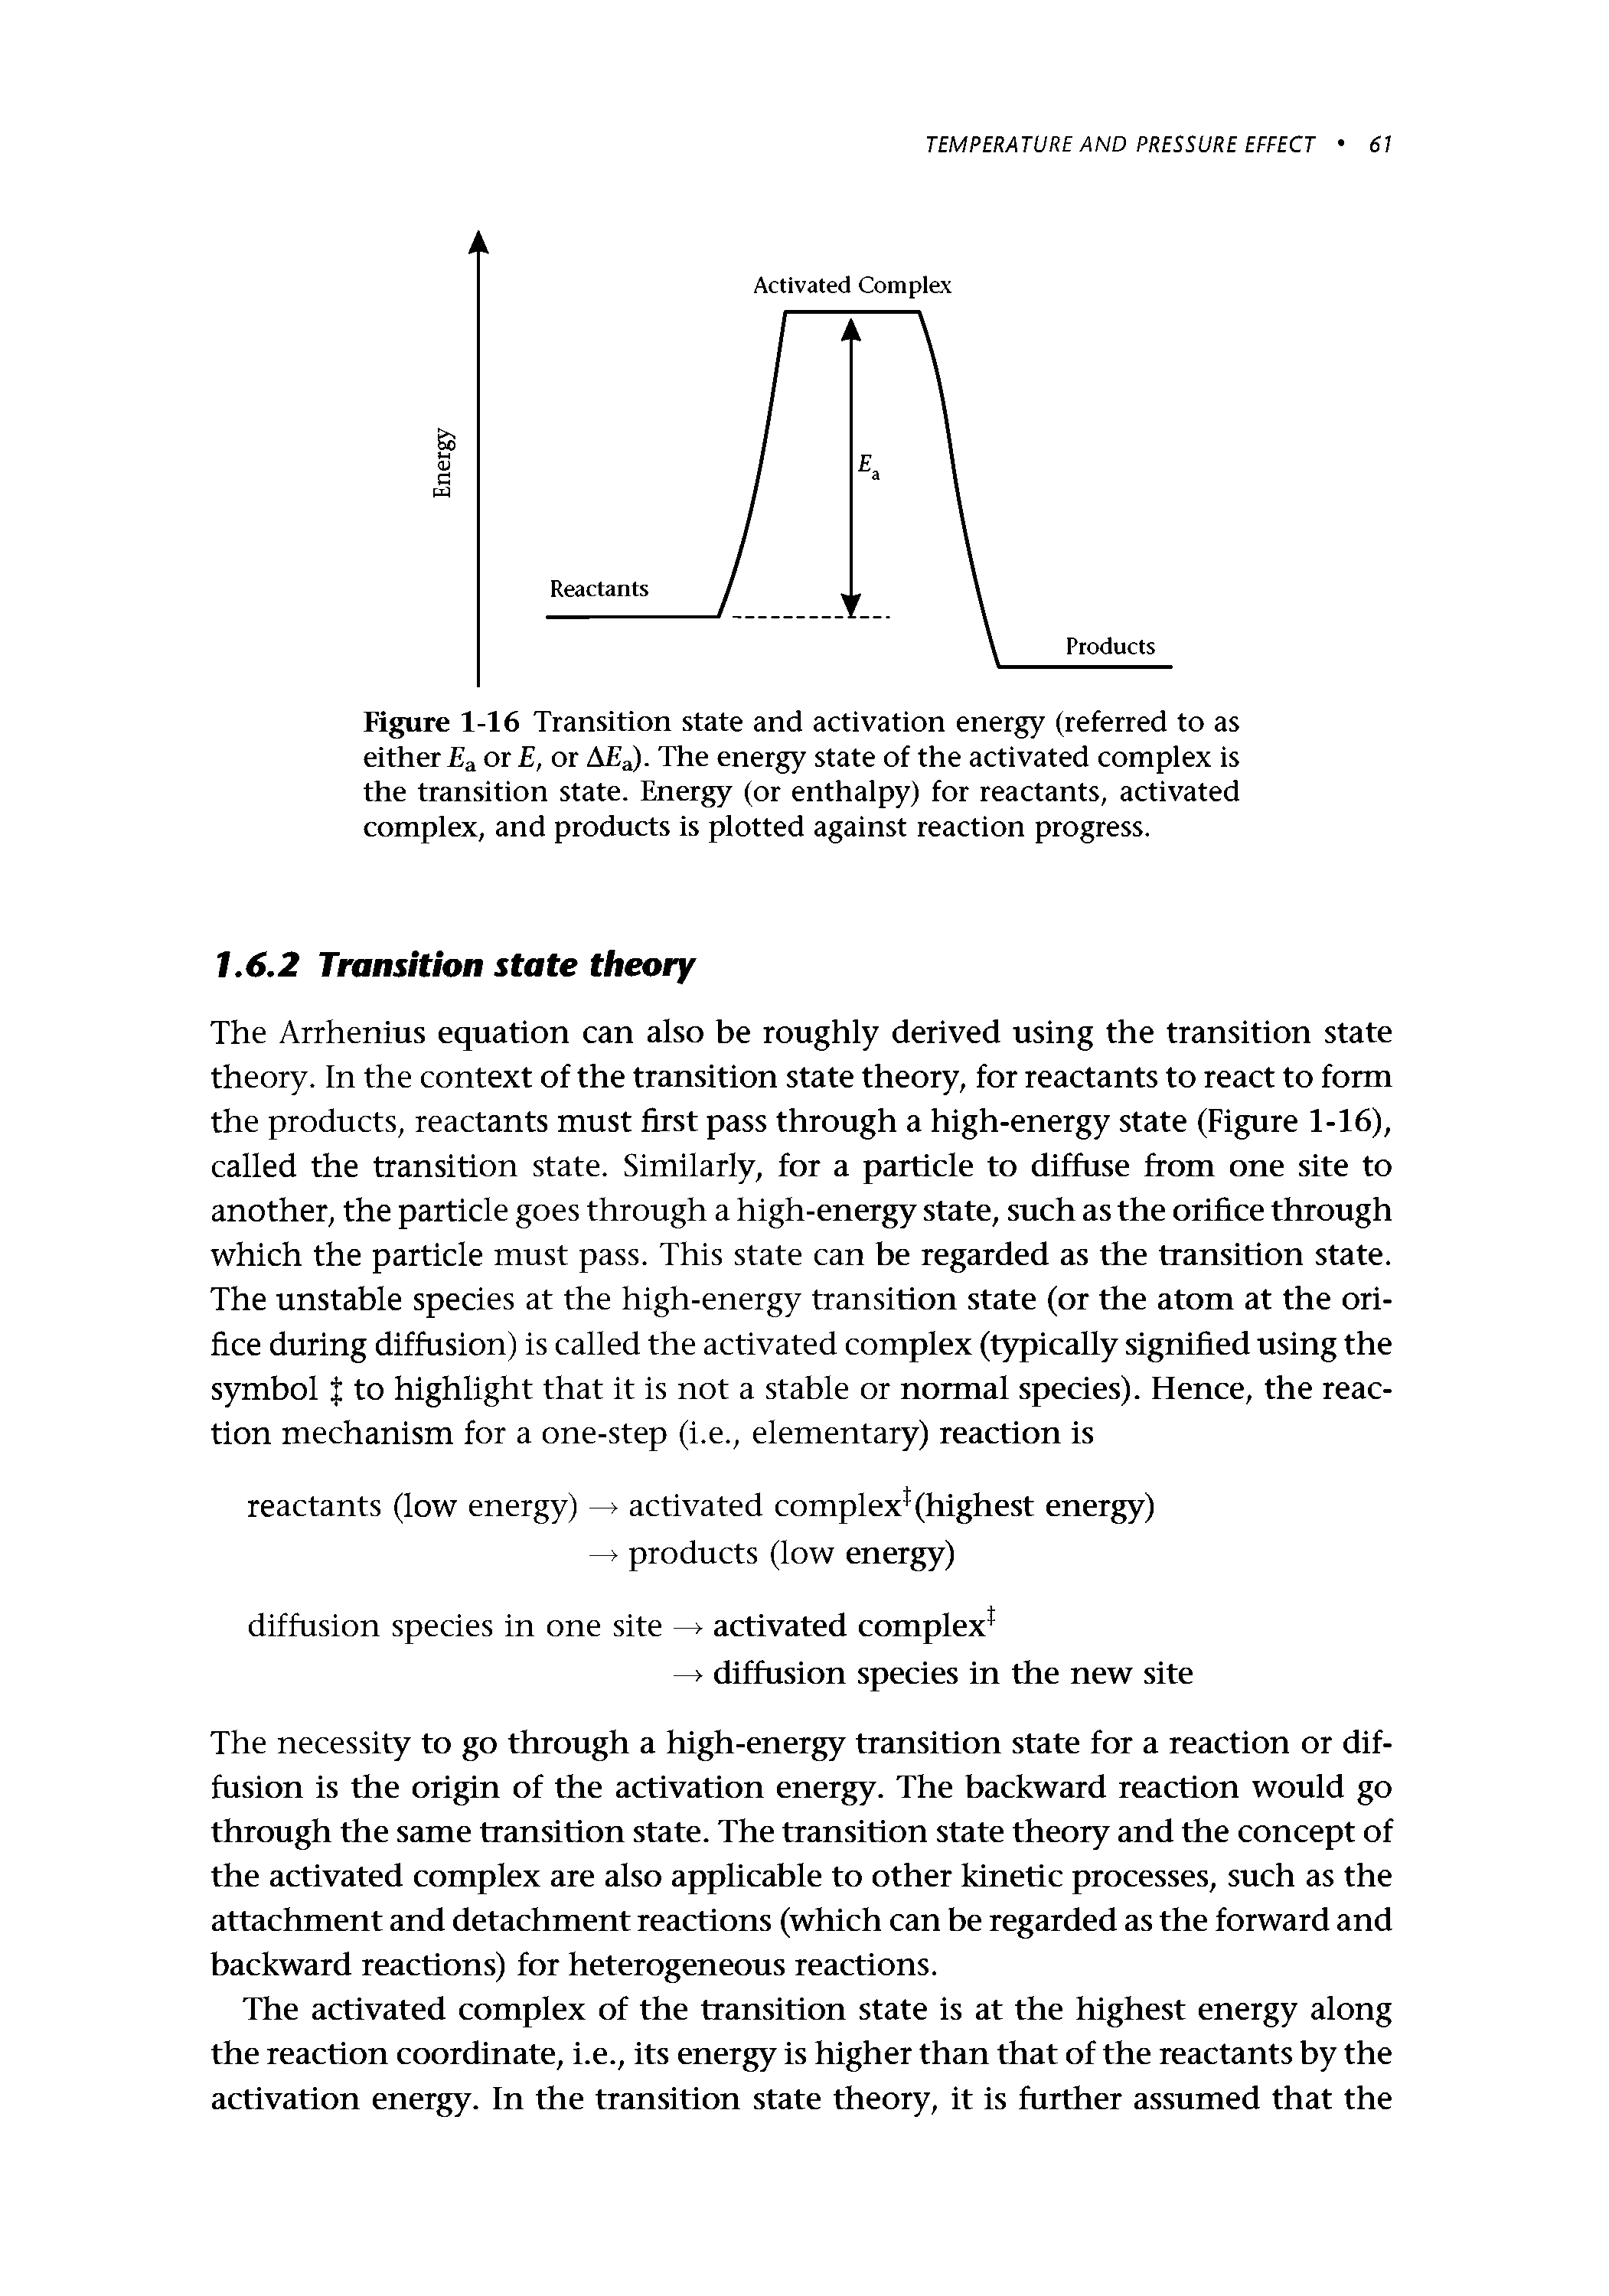 Figure 1-16 Transition state and activation energy (referred to as either or E, or A a)- The energy state of the activated complex is the transition state. Energy (or enthalpy) for reactants, activated complex, and products is plotted against reaction progress.